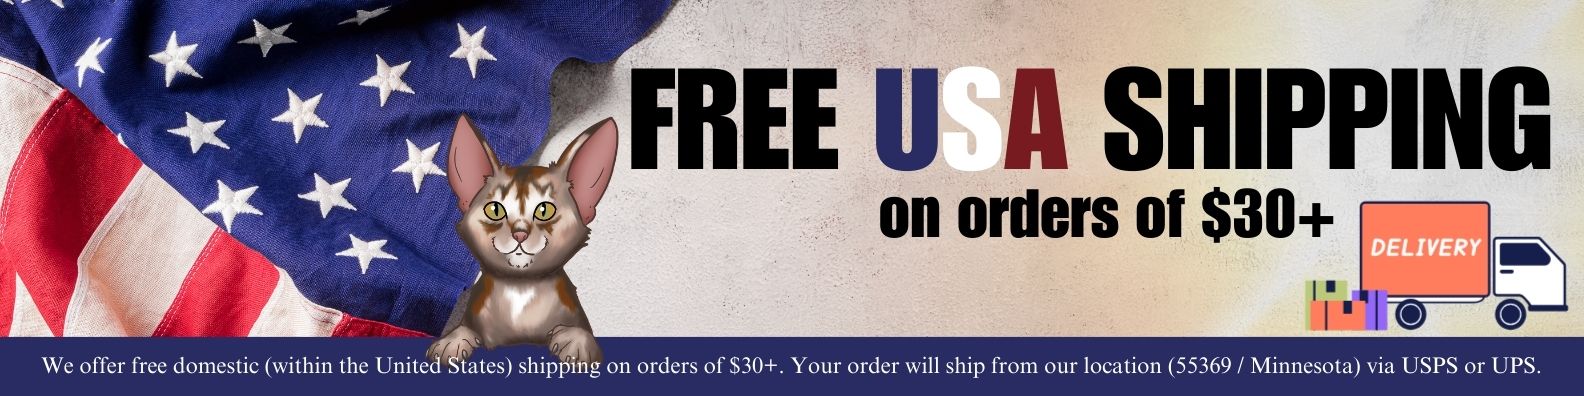 We offer free domestic shipping, within the United States of America, on orders of $30 or more.